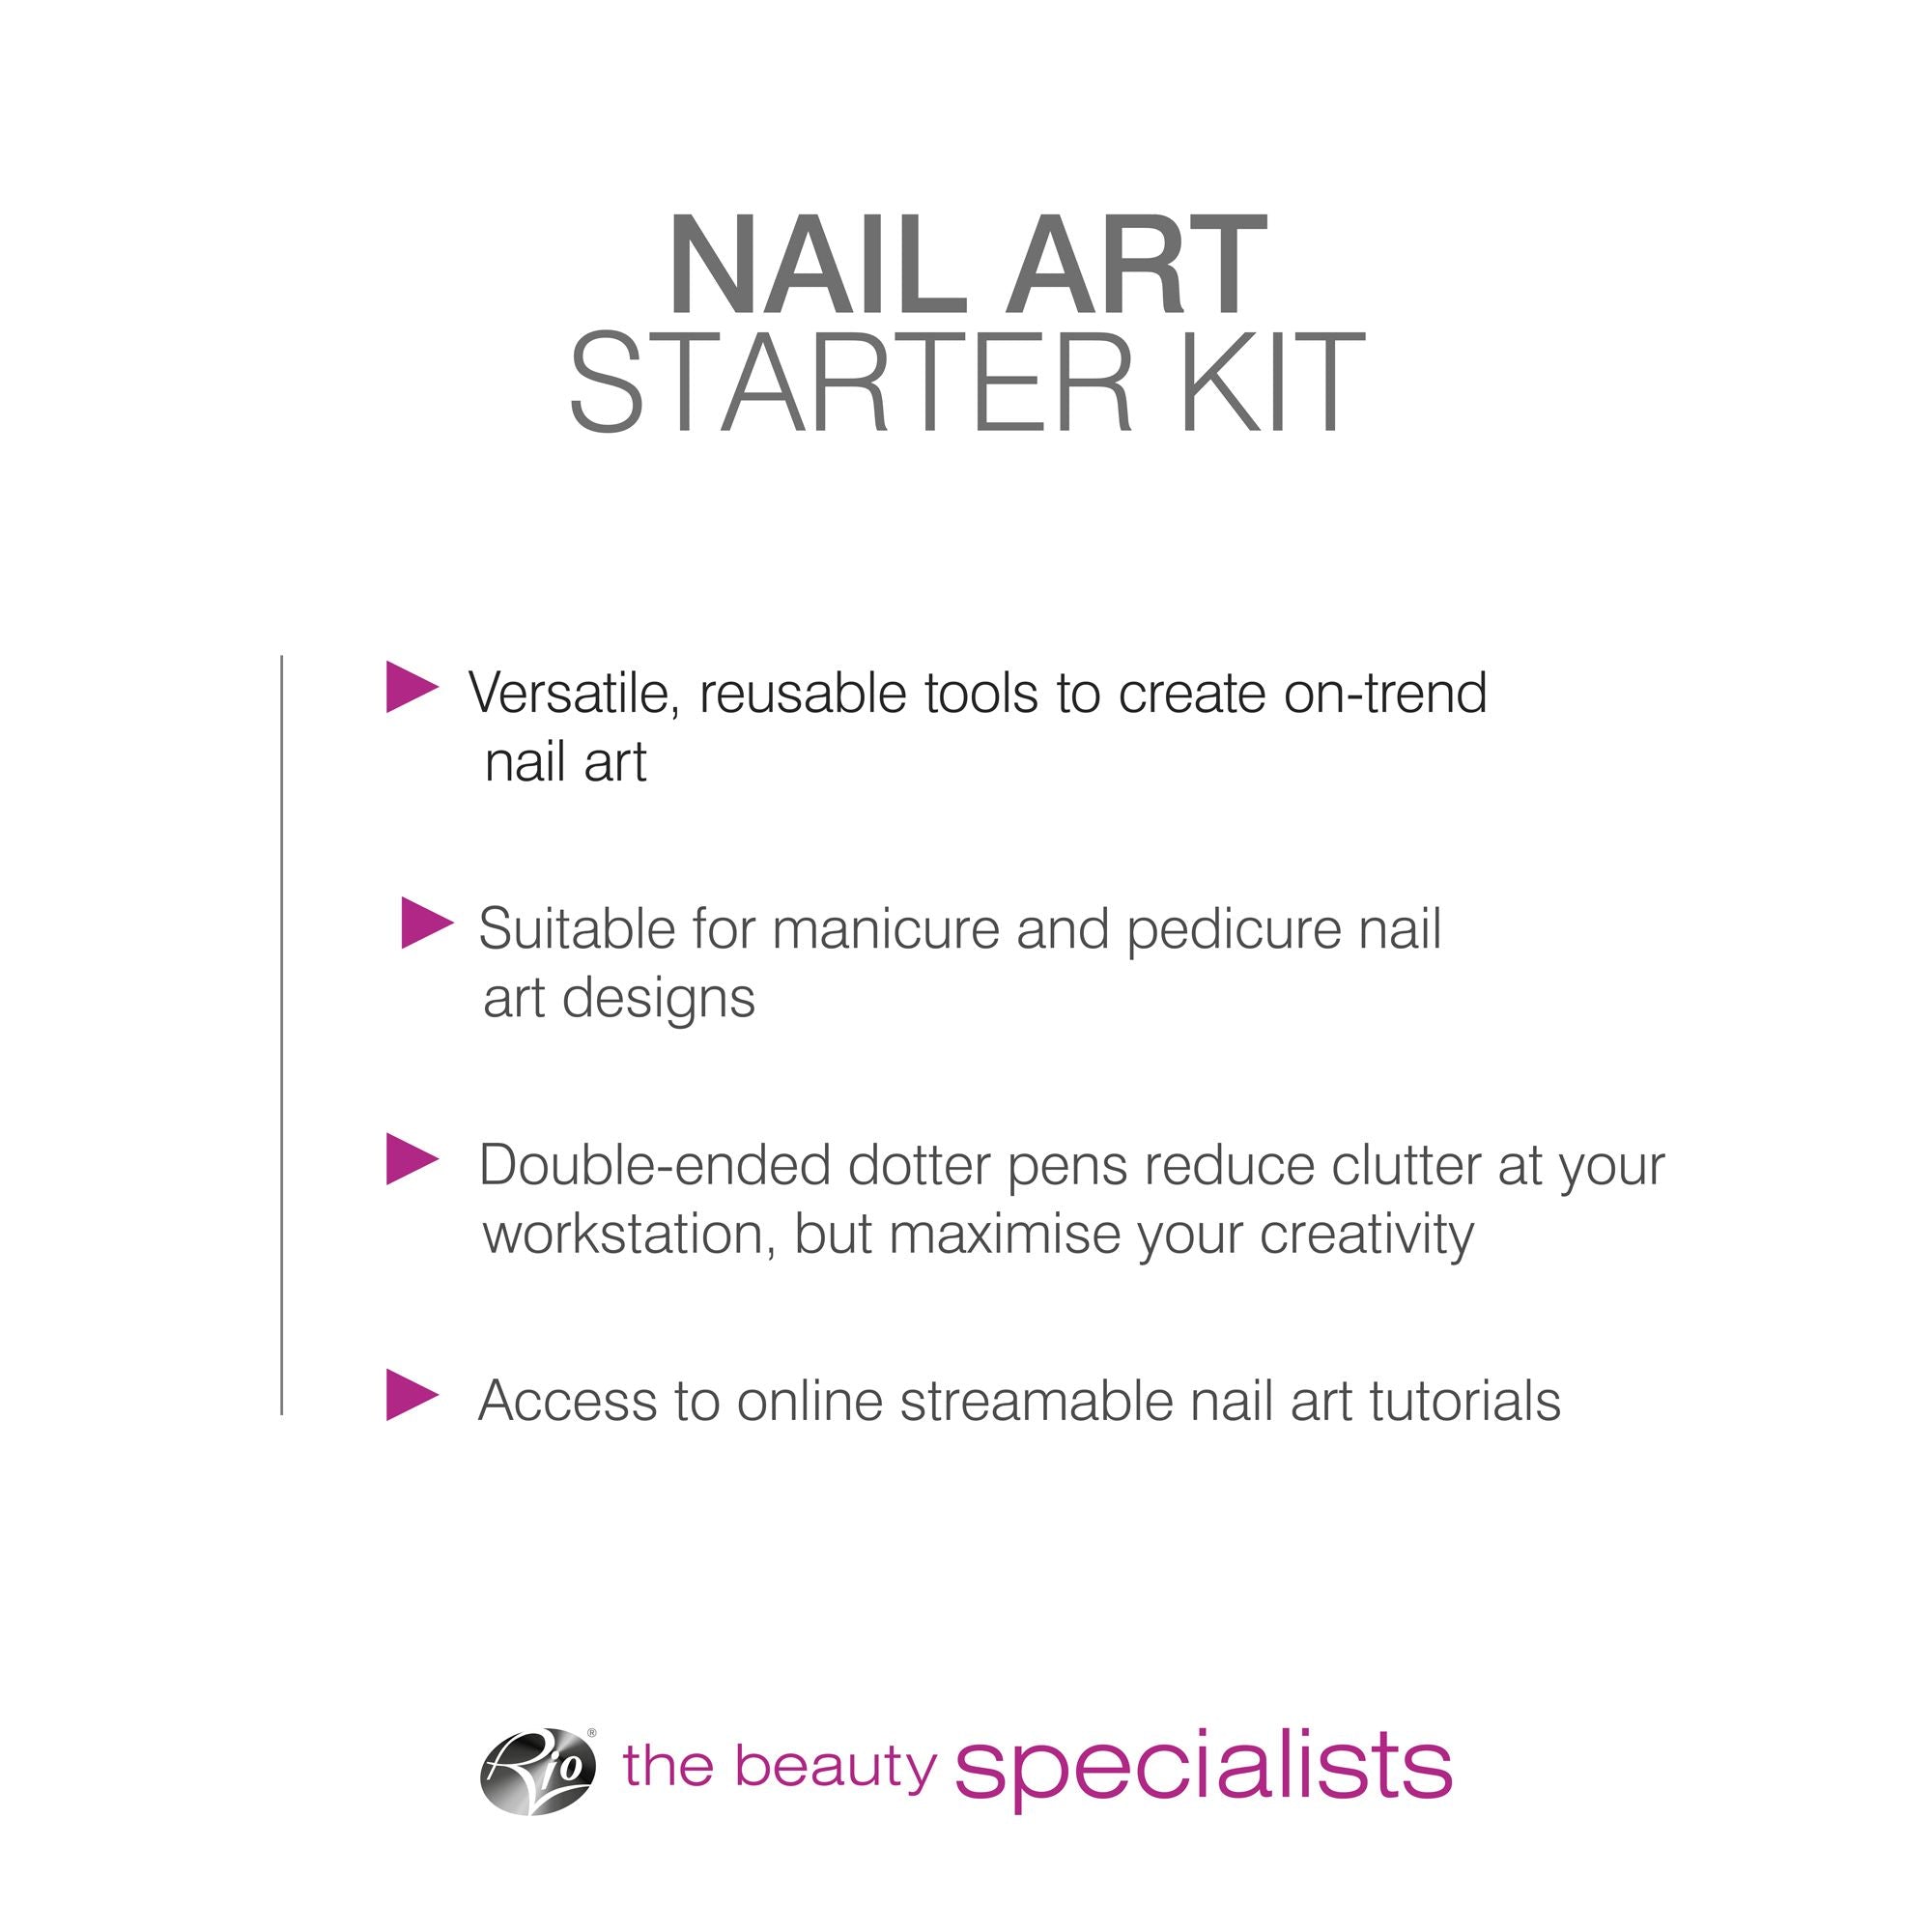 bulleted text listing features: versatile, reusable tools to create on-tend nail art, suitable for manicure and pedicure nail art designs, double-ended dotter pens reduce clutter at your workstation, but maximise your creativity, access to online streamable nail art tutorials 